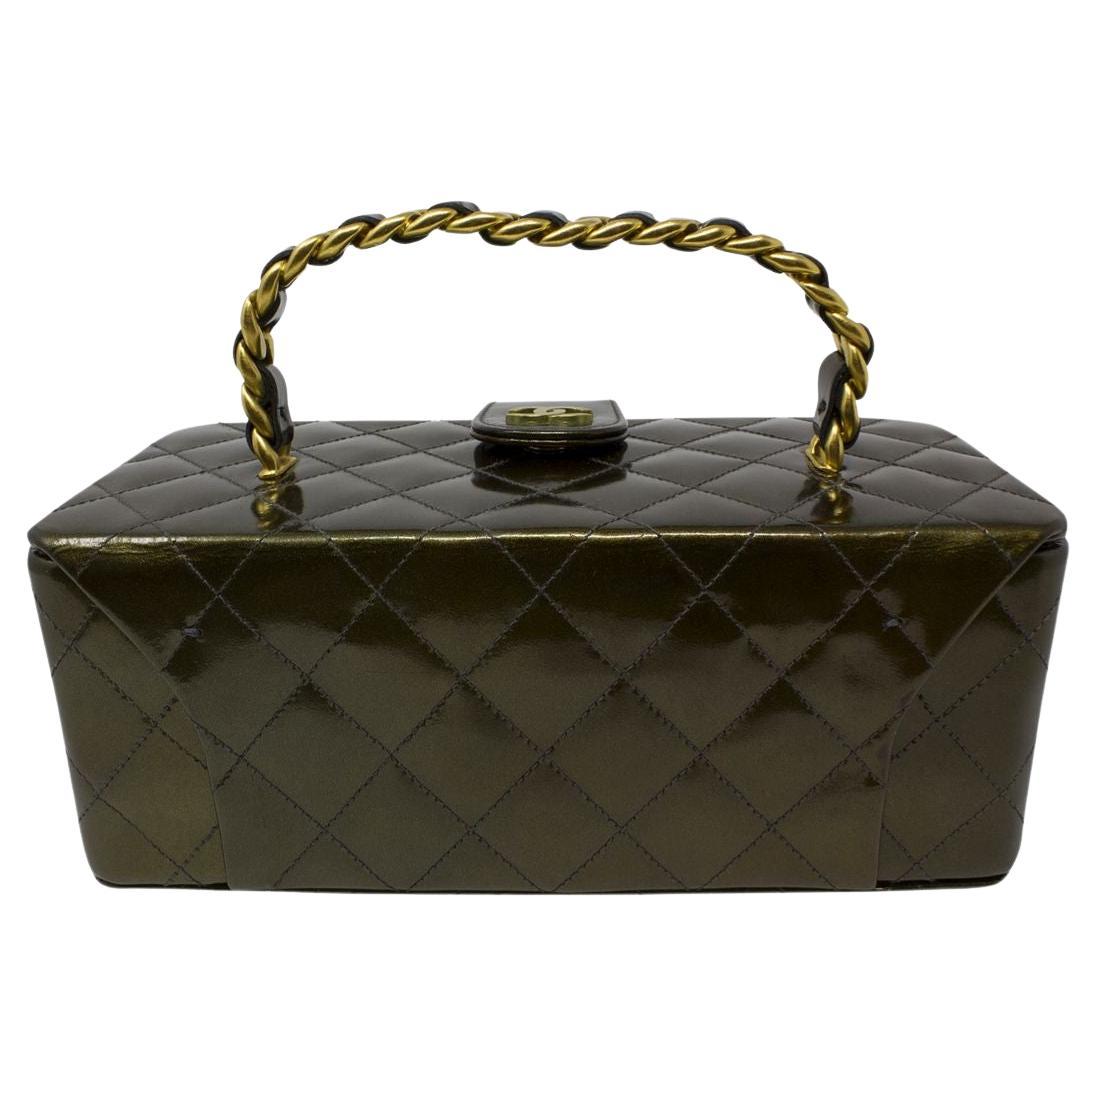 Chanel 1994 Collector's Olive Green Patent Leather Quilted Top Handle Bag For Sale